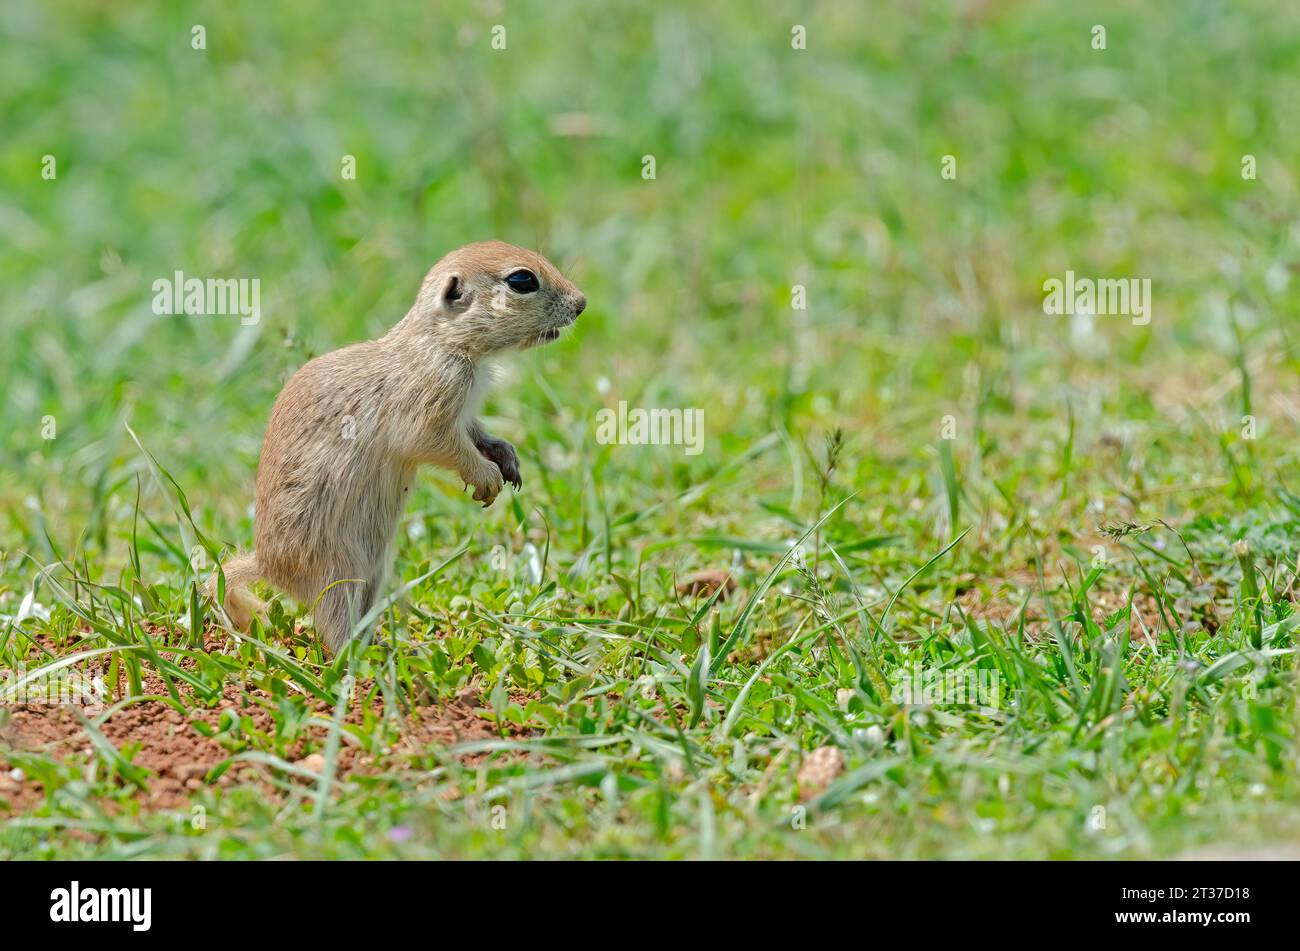 Baby ground squirrel standing. Cute funny animal ground squirrel. Green nature background. Stock Photo